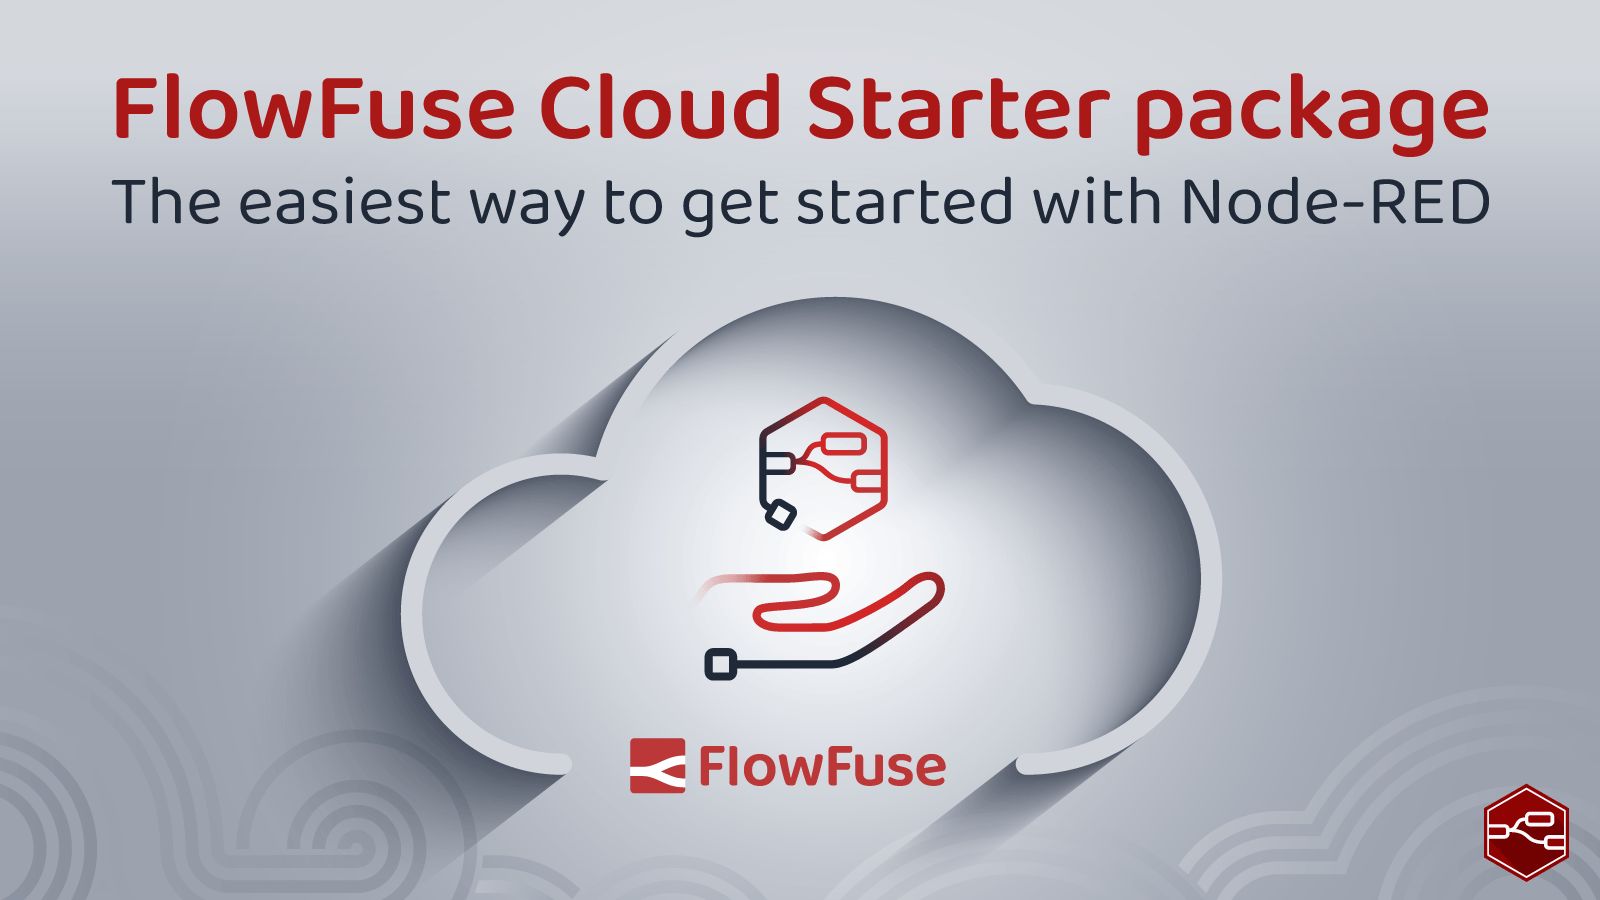 Image representing FlowFuse Cloud Starter package - The easiest way to get started with Node-RED